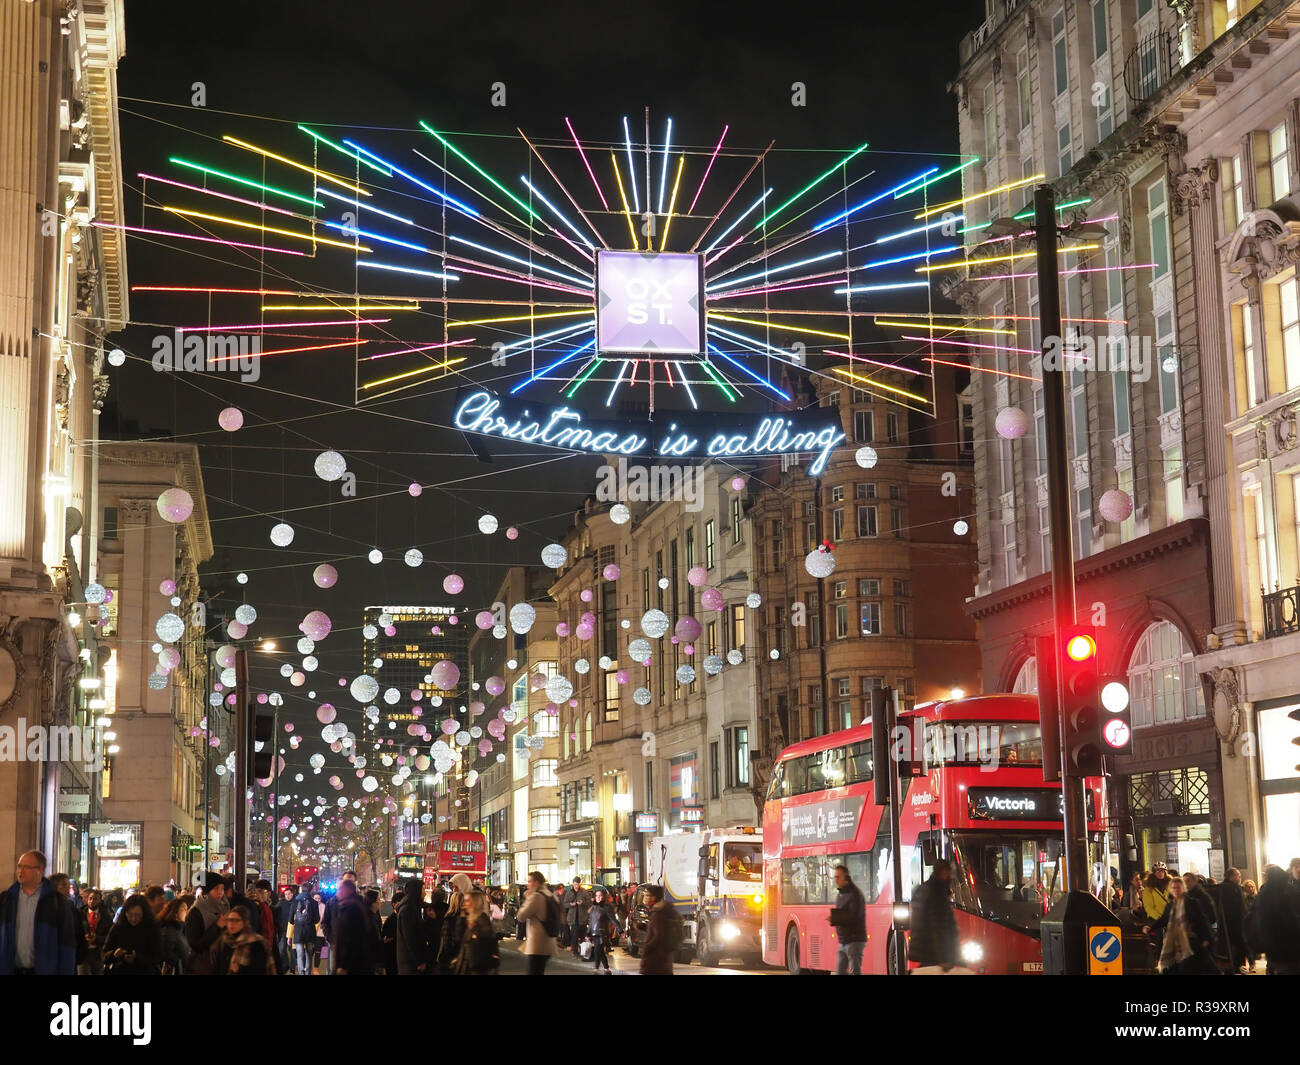 View looking up at the festive Christmas lights at night  in Oxford Street London 2018 Stock Photo